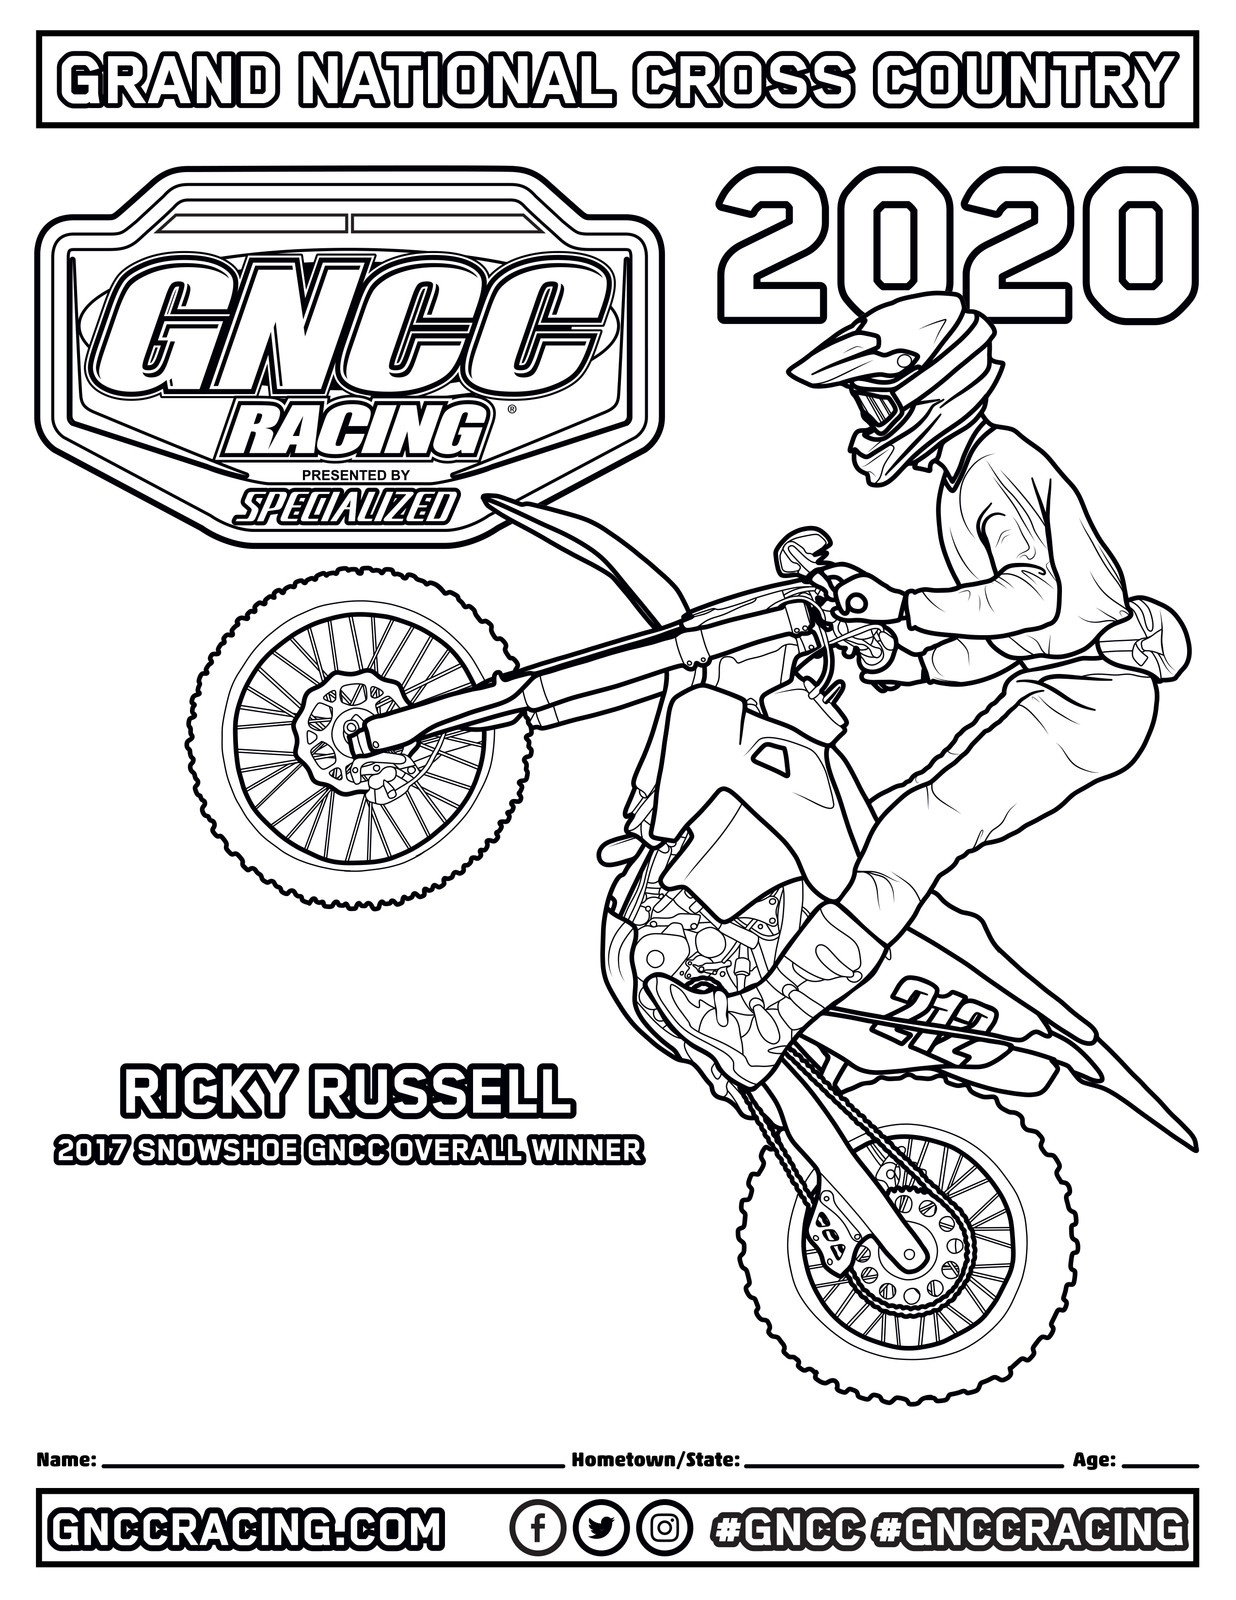 Fresh Gncc Coloring Pages For Your Kids Gncc Racing Racer X